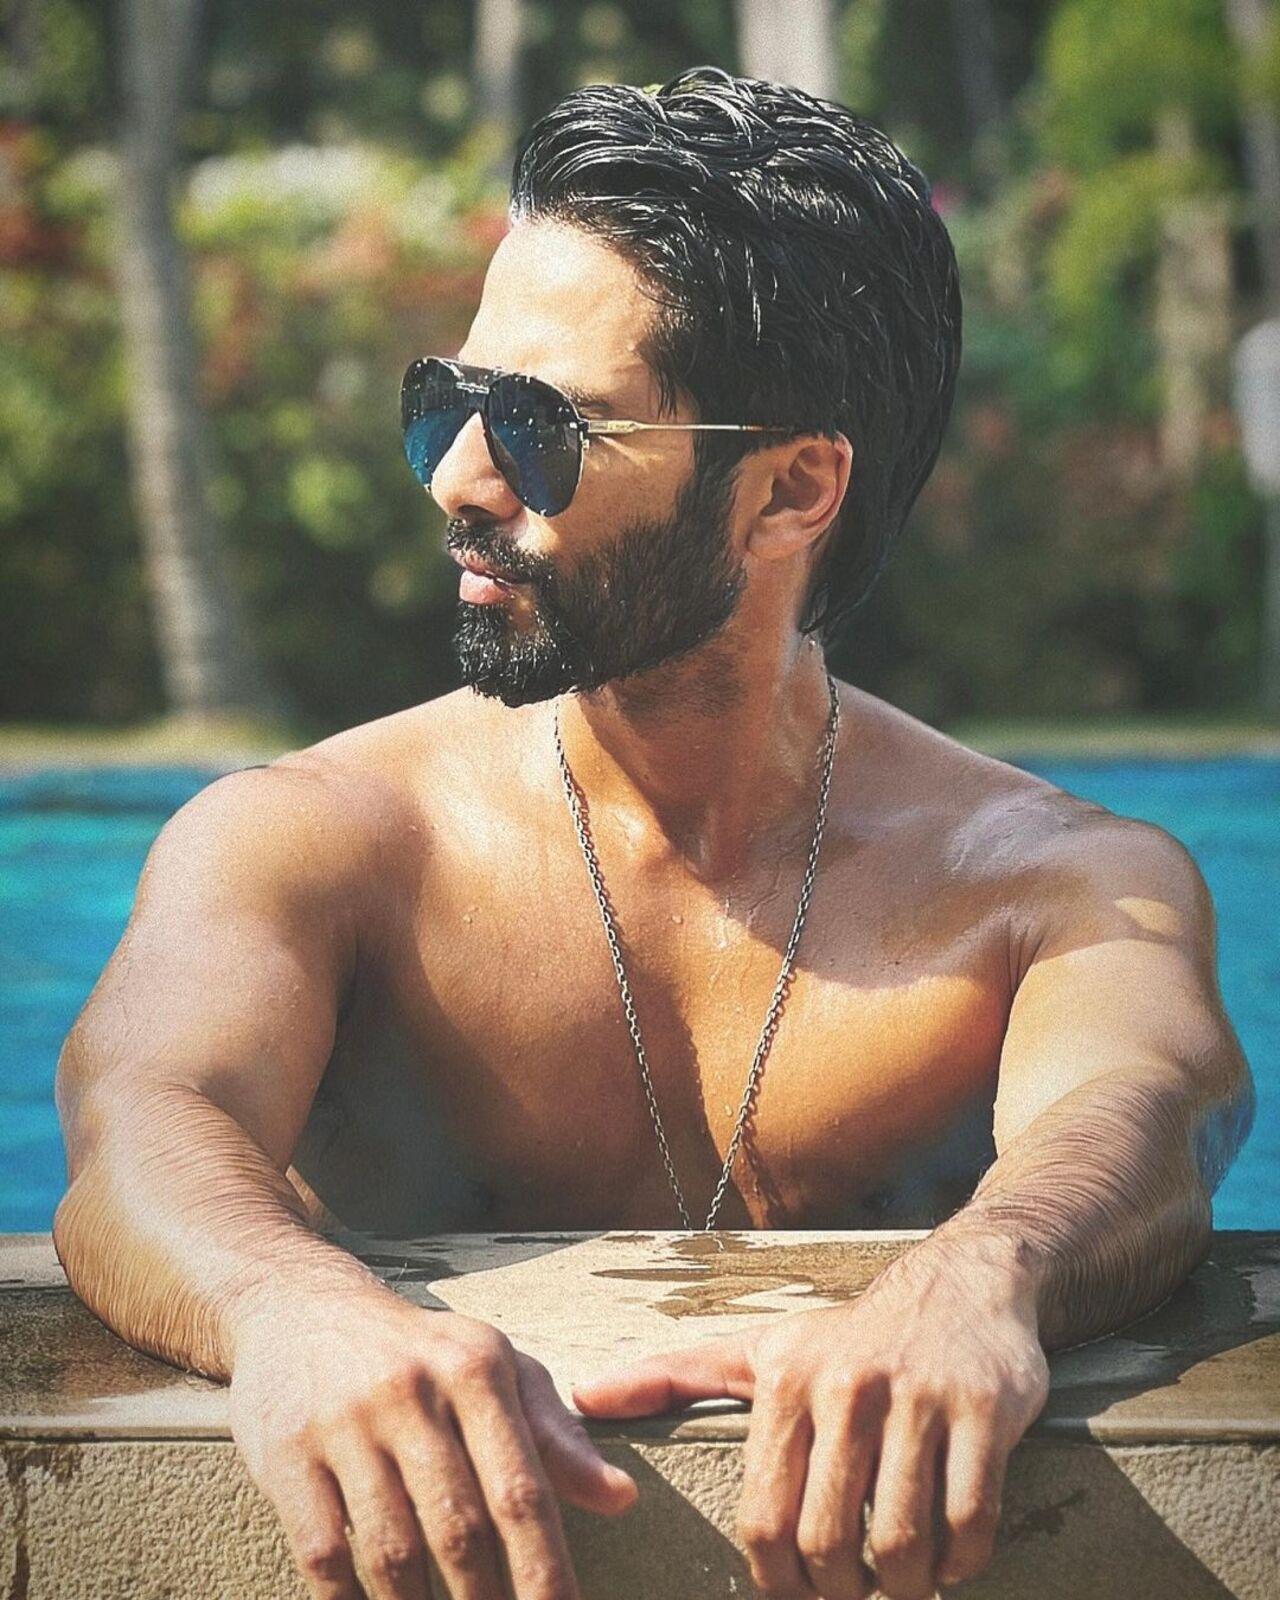 Shahid Kapoor is a popular Bollywood actor known for his exceptional acting skills and well-maintained physique. Shahid Kapoor's fitness routine typically includes a combination of rigorous workouts, balanced nutrition, and discipline